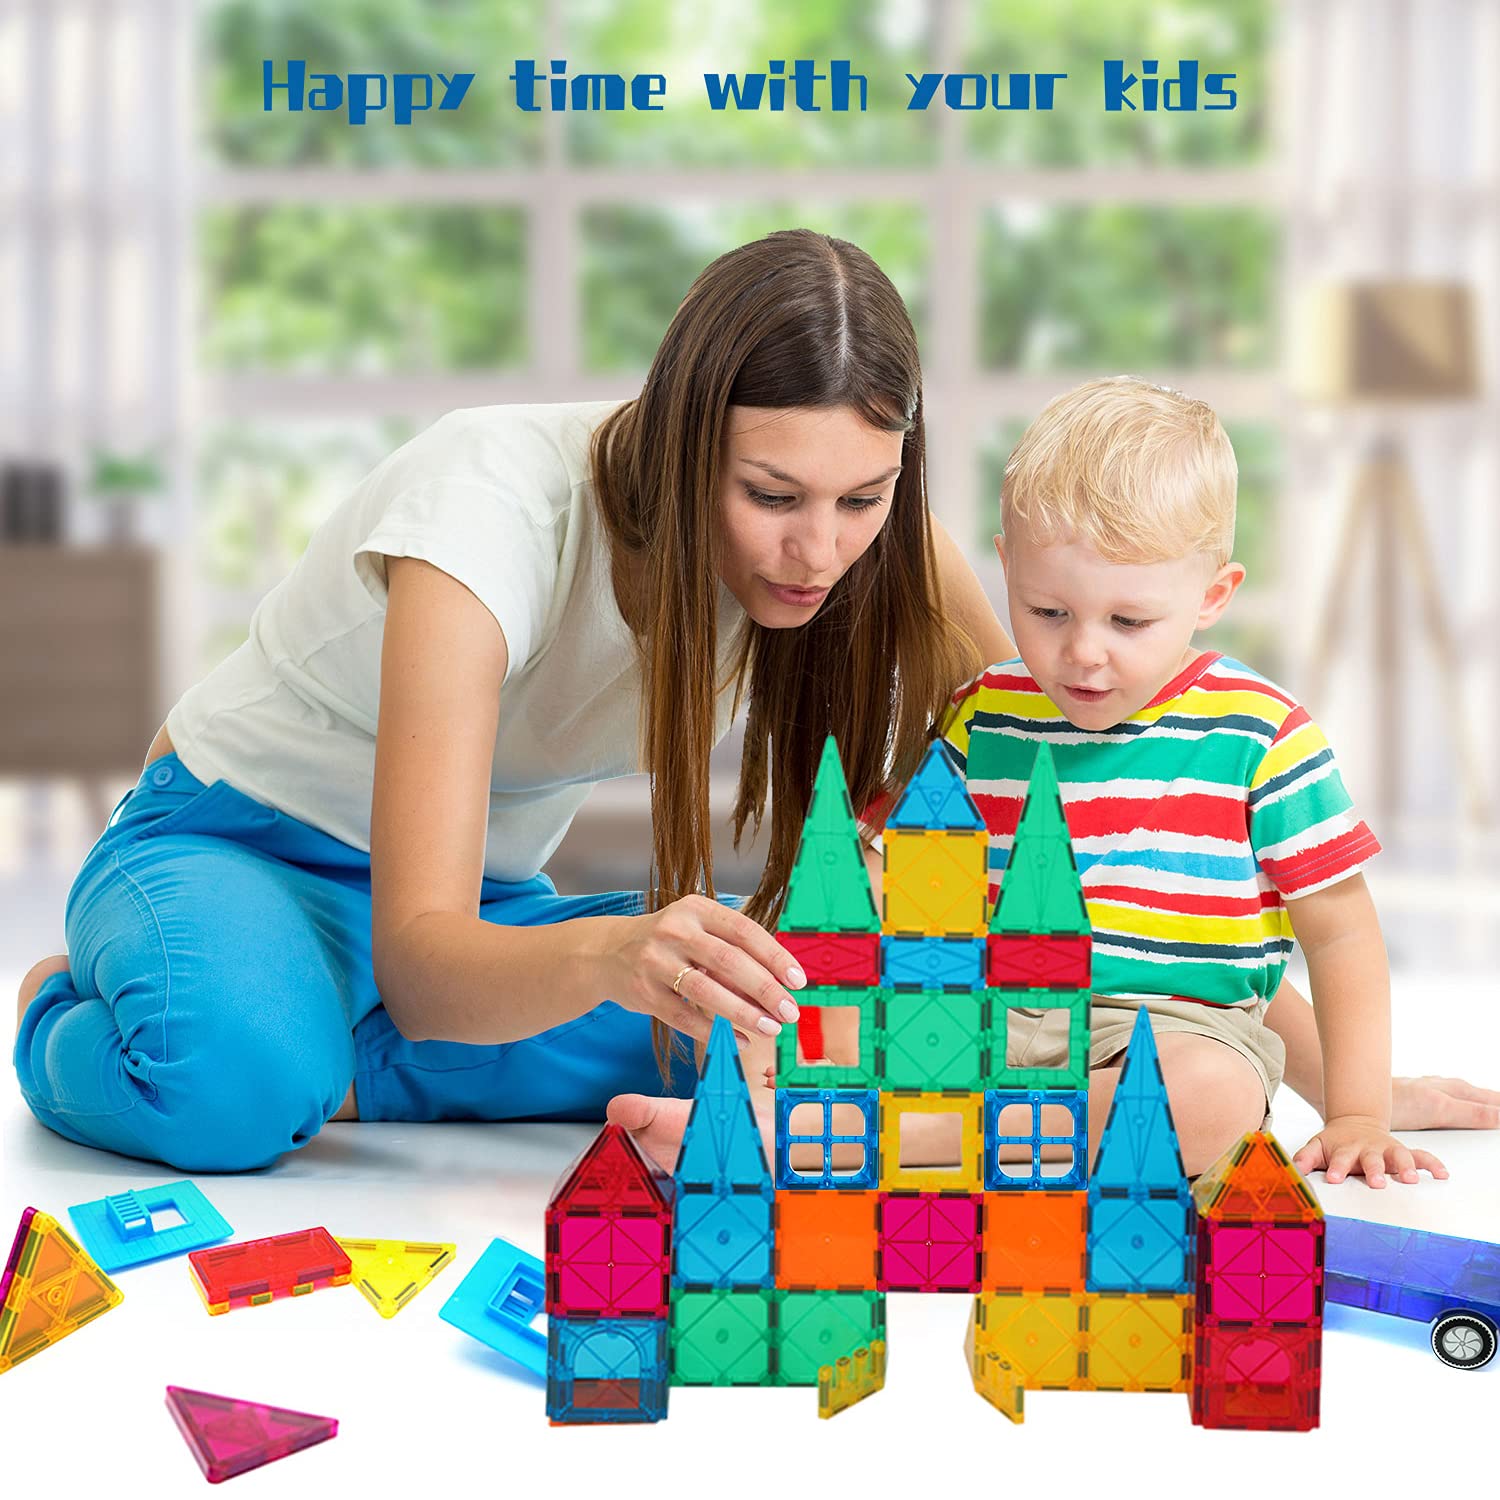 AFUNX 130 PCS Magnetic Tiles Building Blocks 3D Clear Magnetic Blocks Construction Playboards, Inspiration Building Tiles Creativity Beyond Imagination, Educational Magnet Toy Set for Kids with 2 Cars